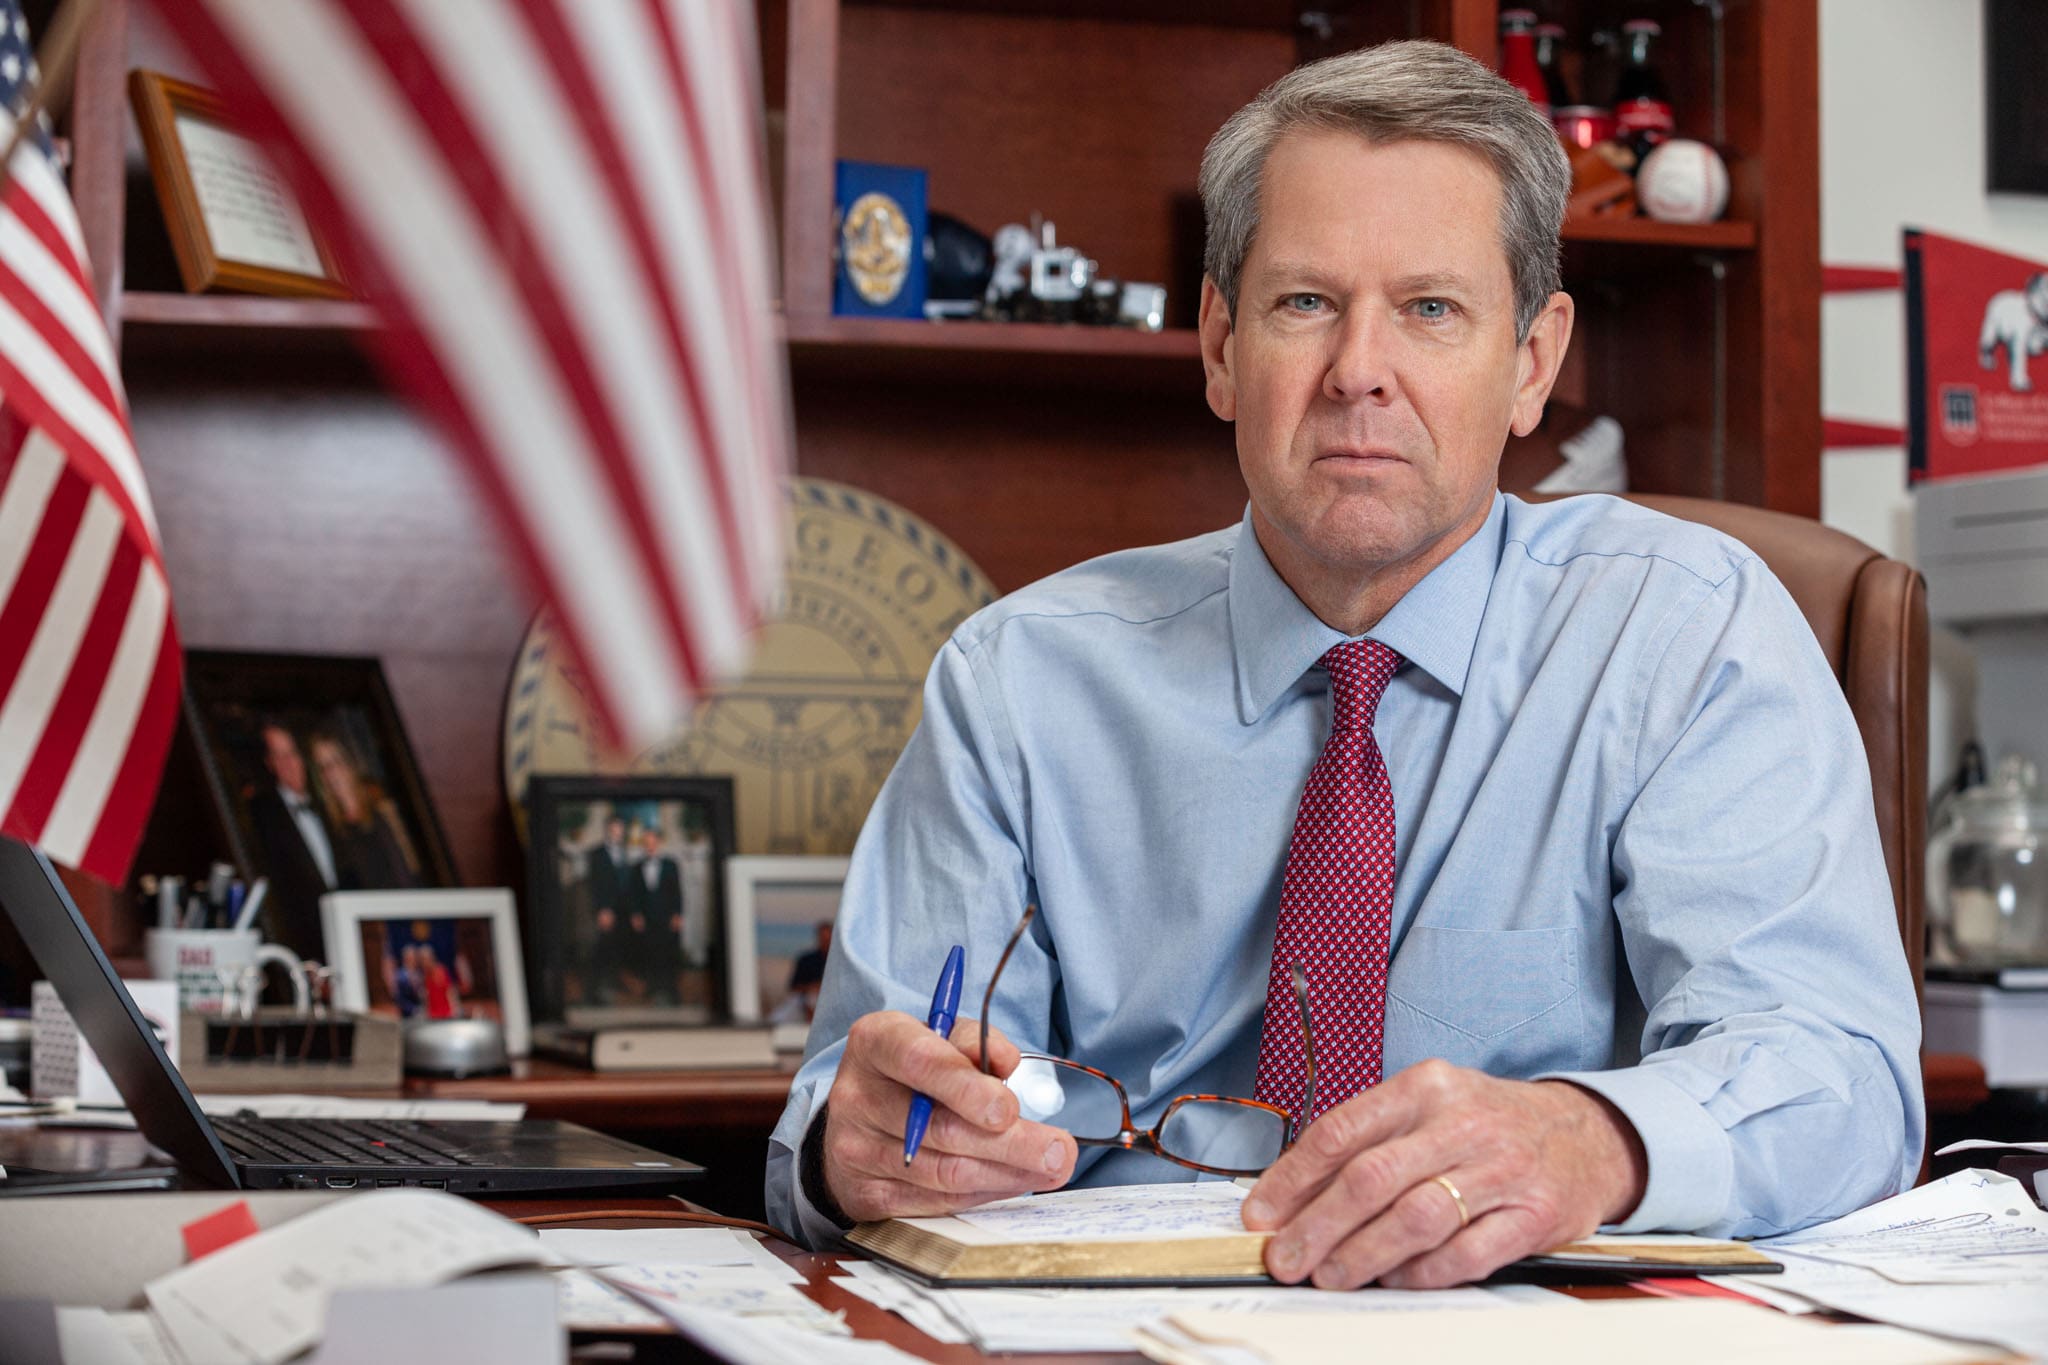 Georgia-Governor-Brian-Kemp-sitting-at-his-desk-in-his-office-at-the-Georgia-State-Capitol